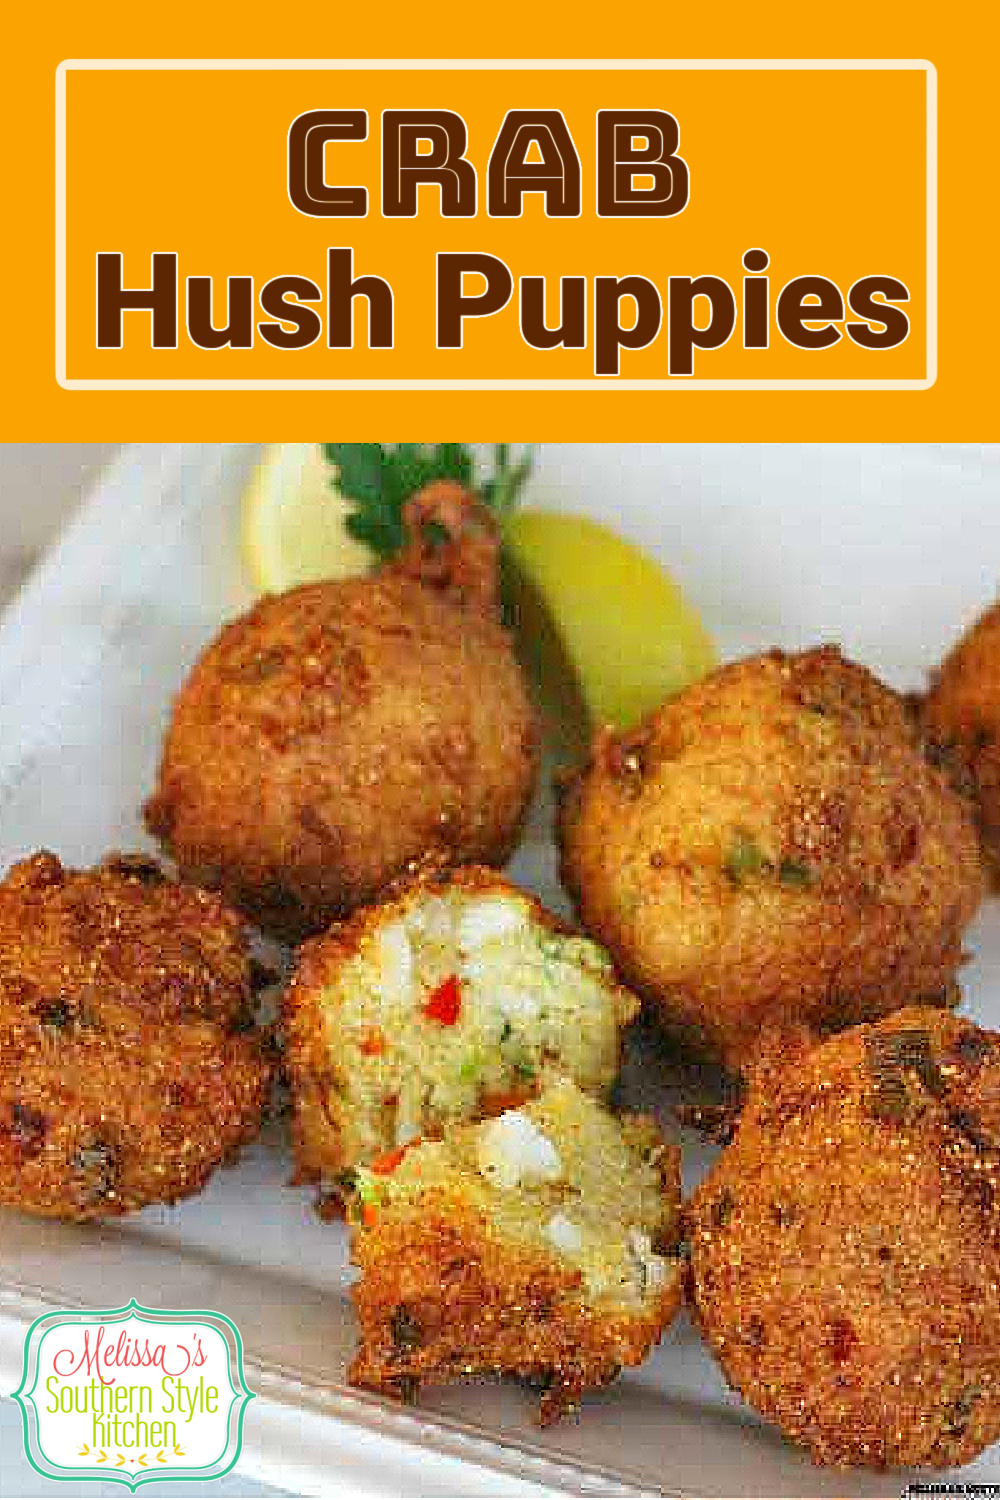 Jump Lump Crab Hush Puppies are simply irresistible #crab #crabhushpuppies #hushpuppies #jumbolumpcrab #seafood #appetizers #snacks #southernfood #southernrecipes #partyfood via @melissasssk